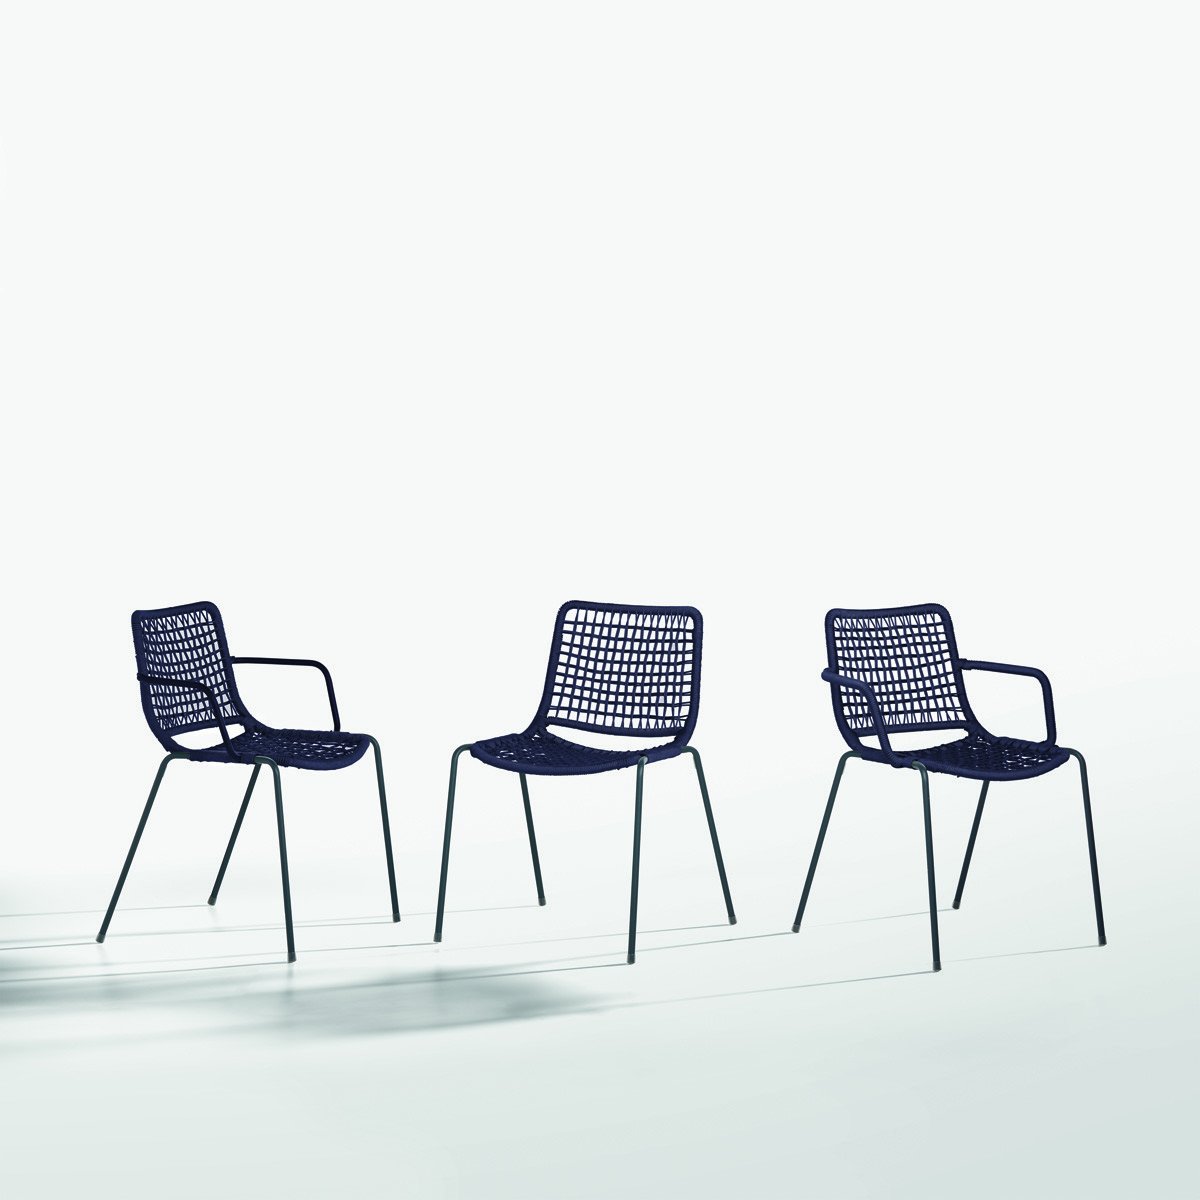 Egao Chair from Potocco, designed by Toan Nguyen